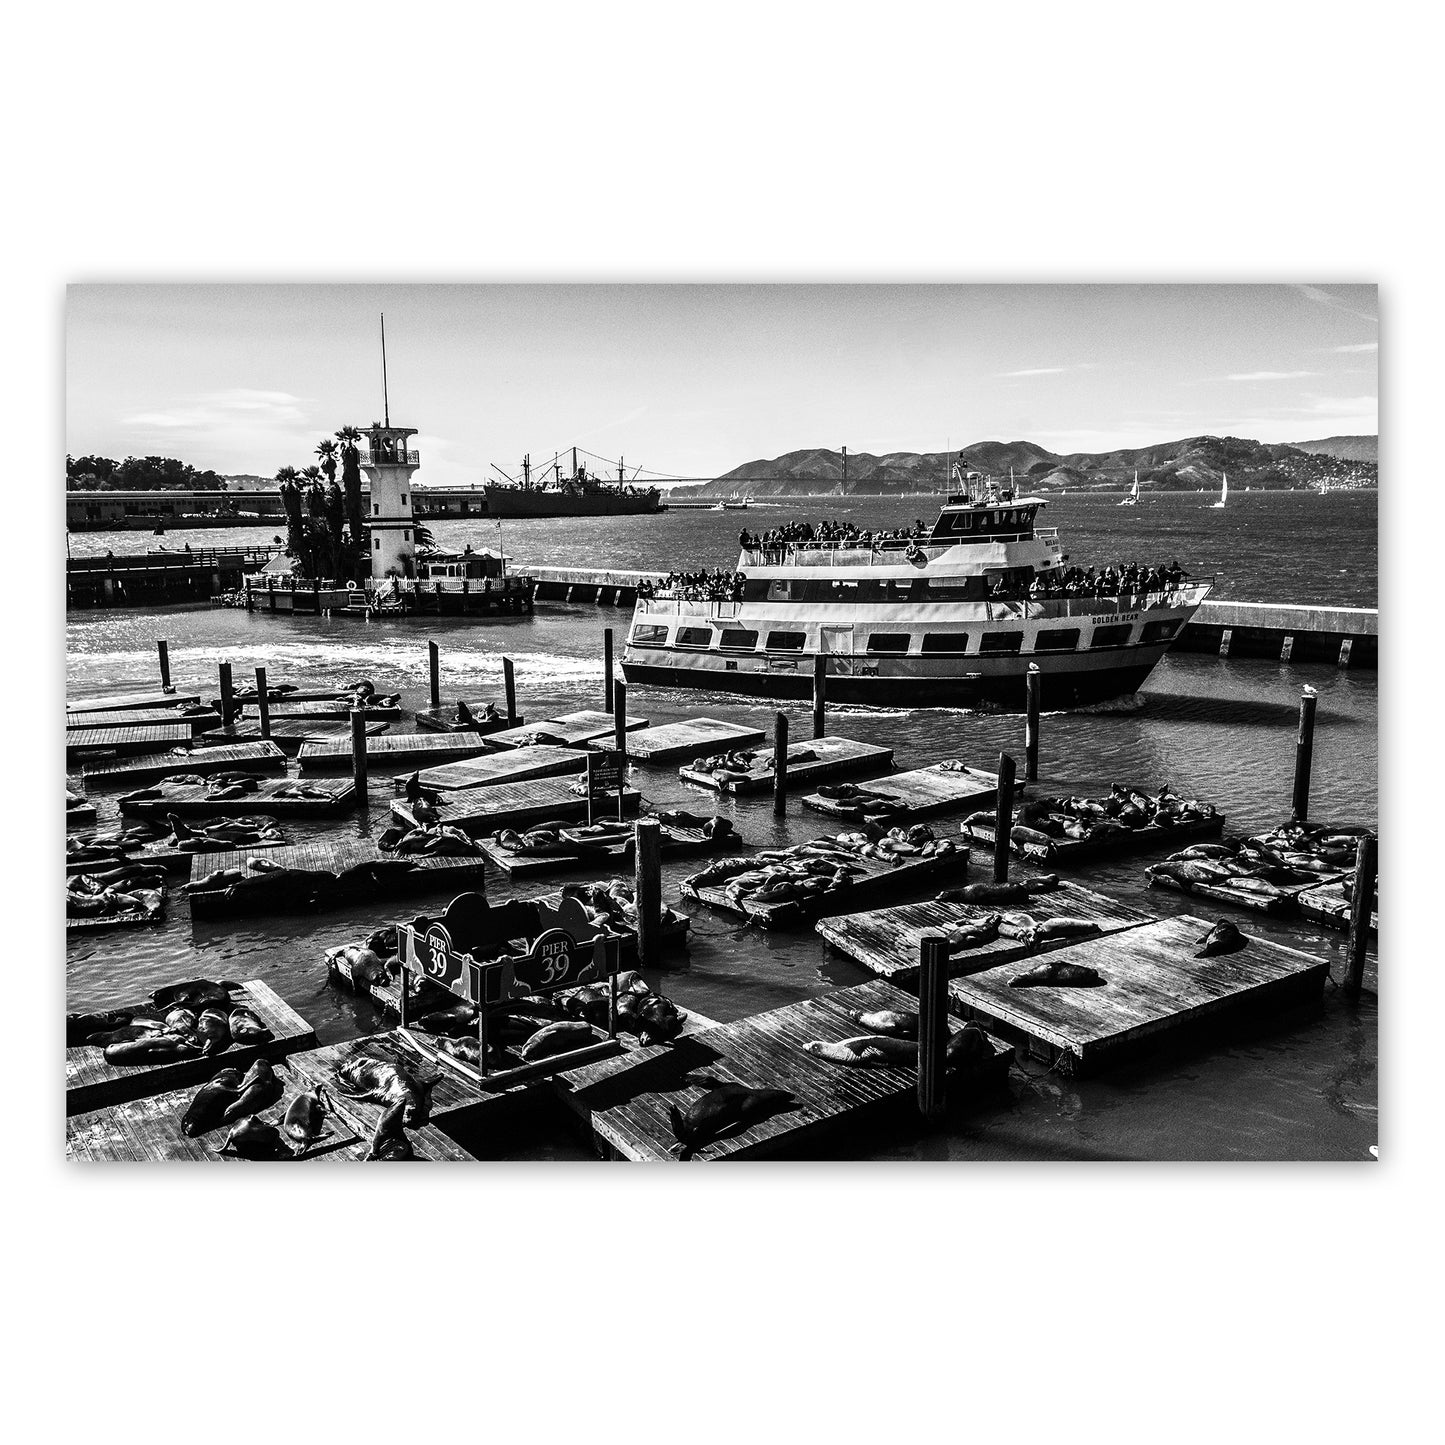 Alessandra Mattanza | LIFE, San Francisco. Seals bask on the piers as people travel the bay by ferry. Available as a photographic print on acrylic glass.